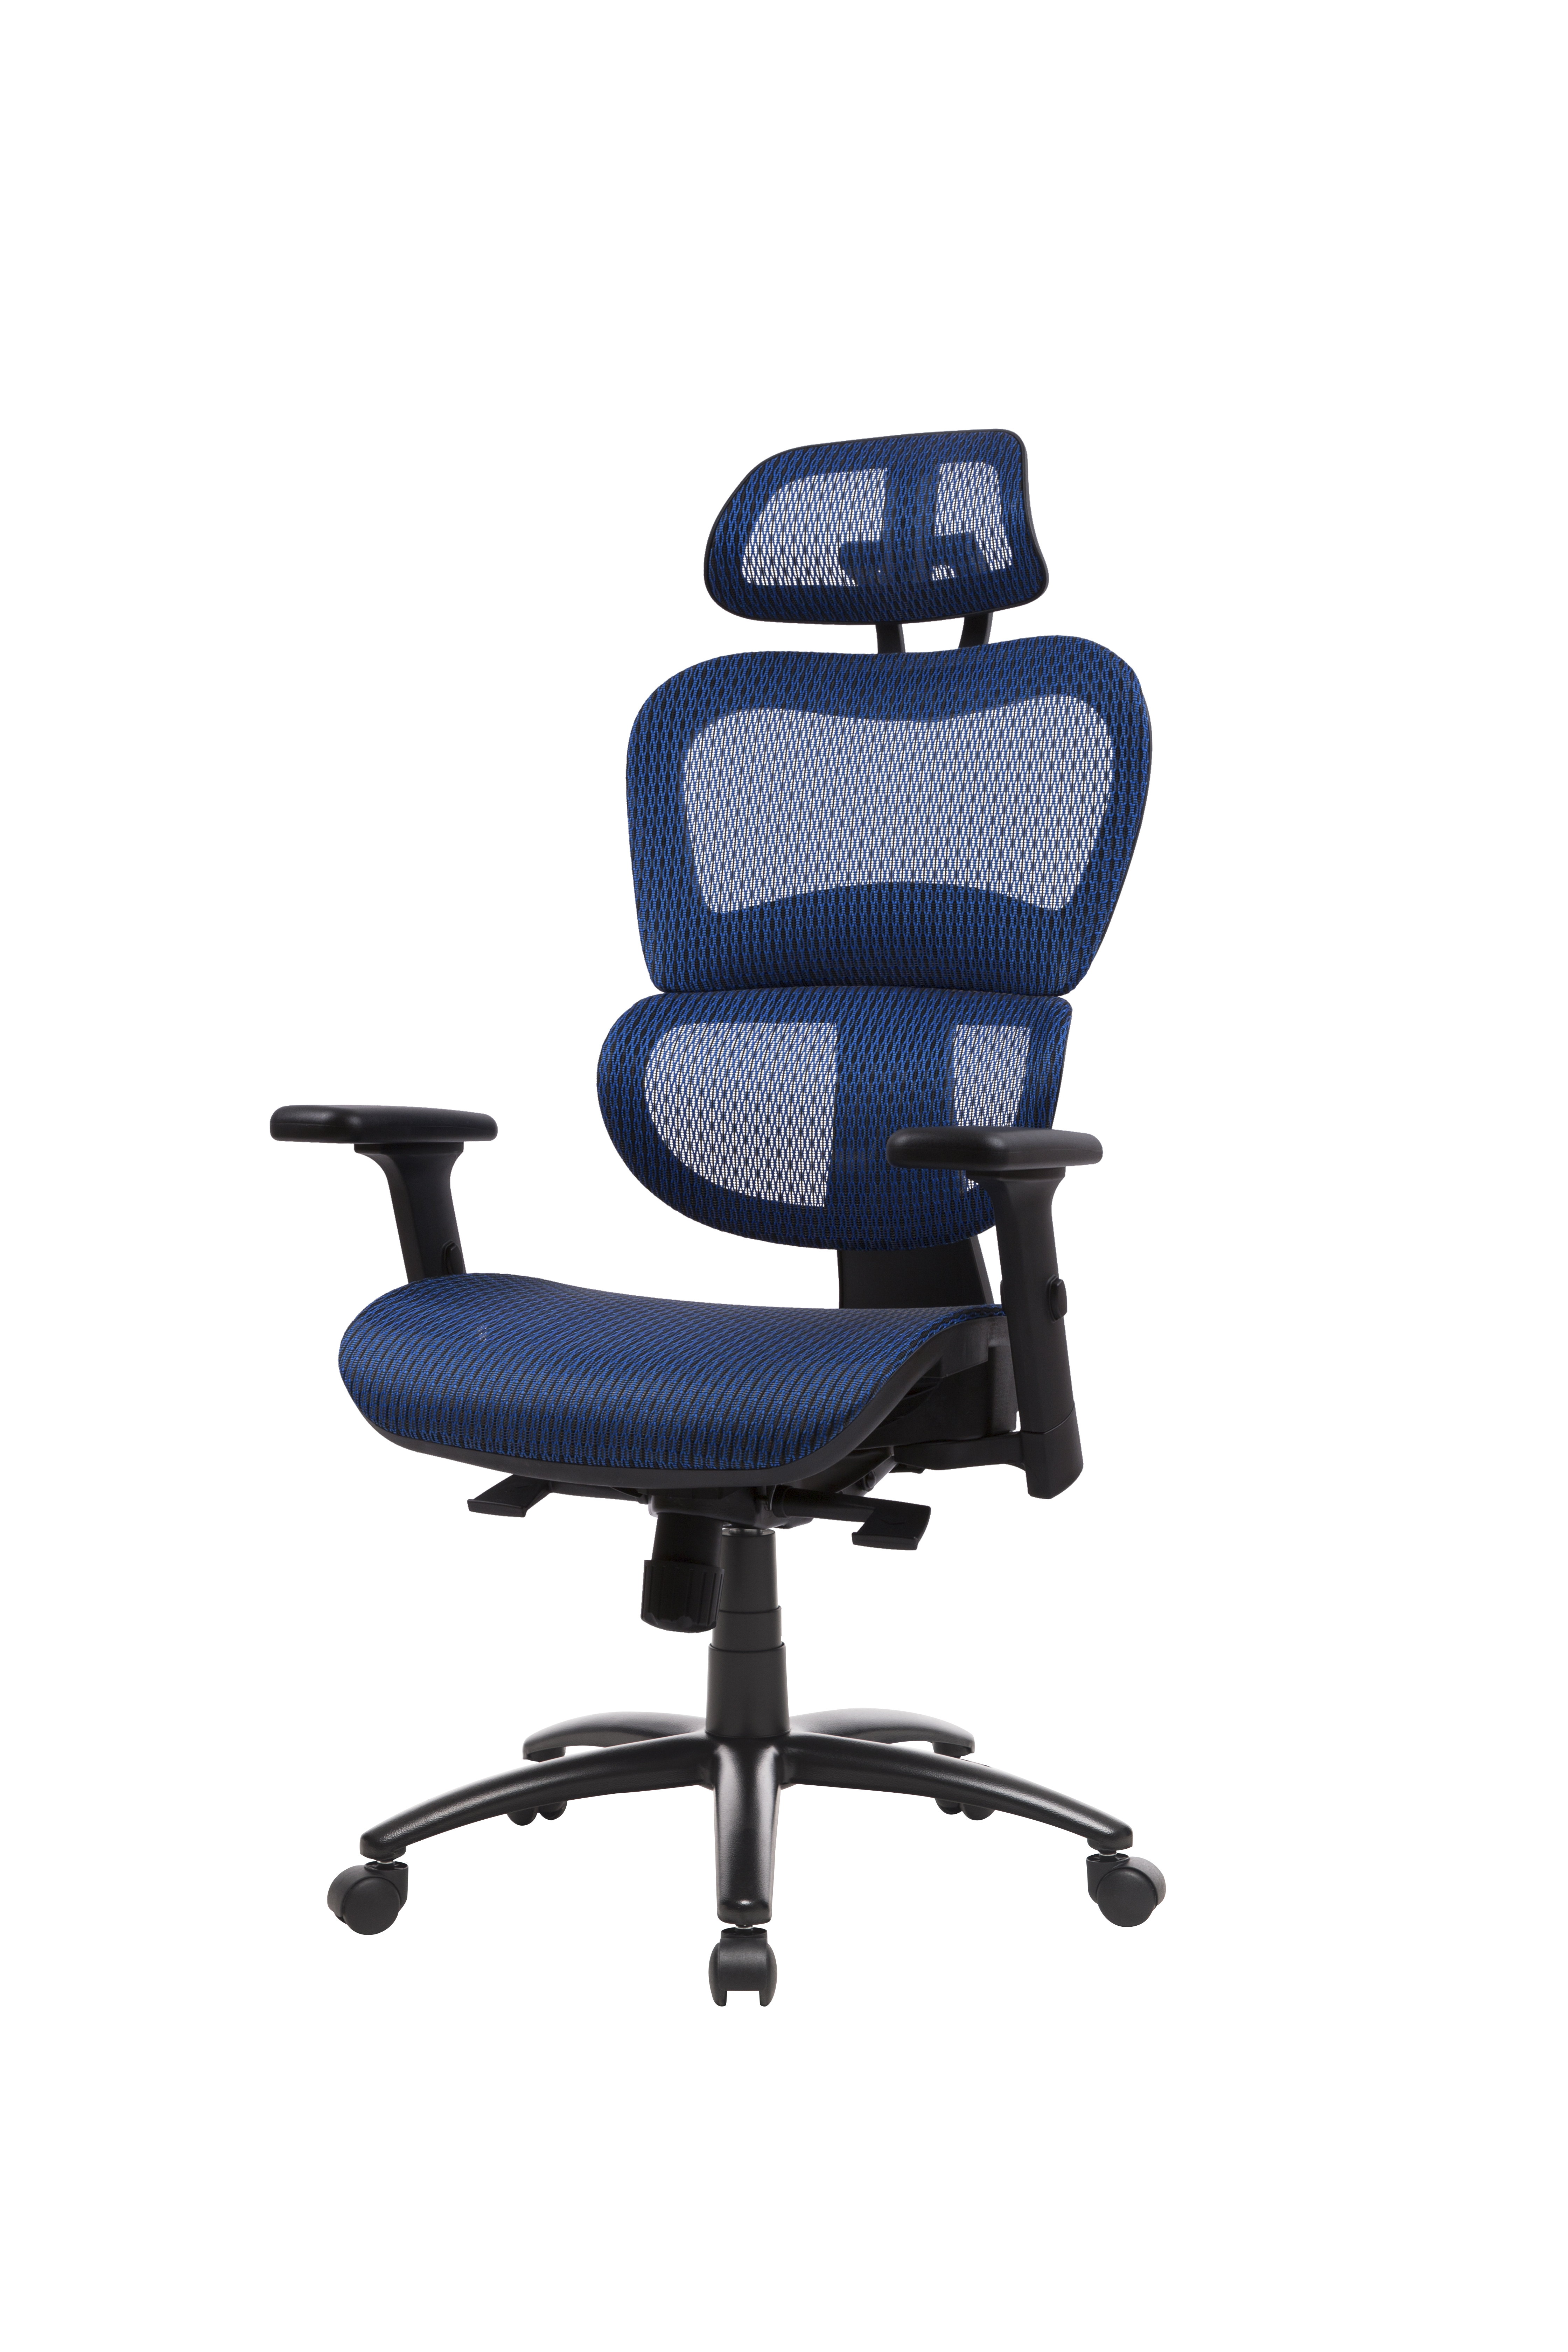 Ergonomic Office Chair Mesh Chair Computer Chair Desk Chair High Back Chair with Adjustable Headrest and Armrest-blue